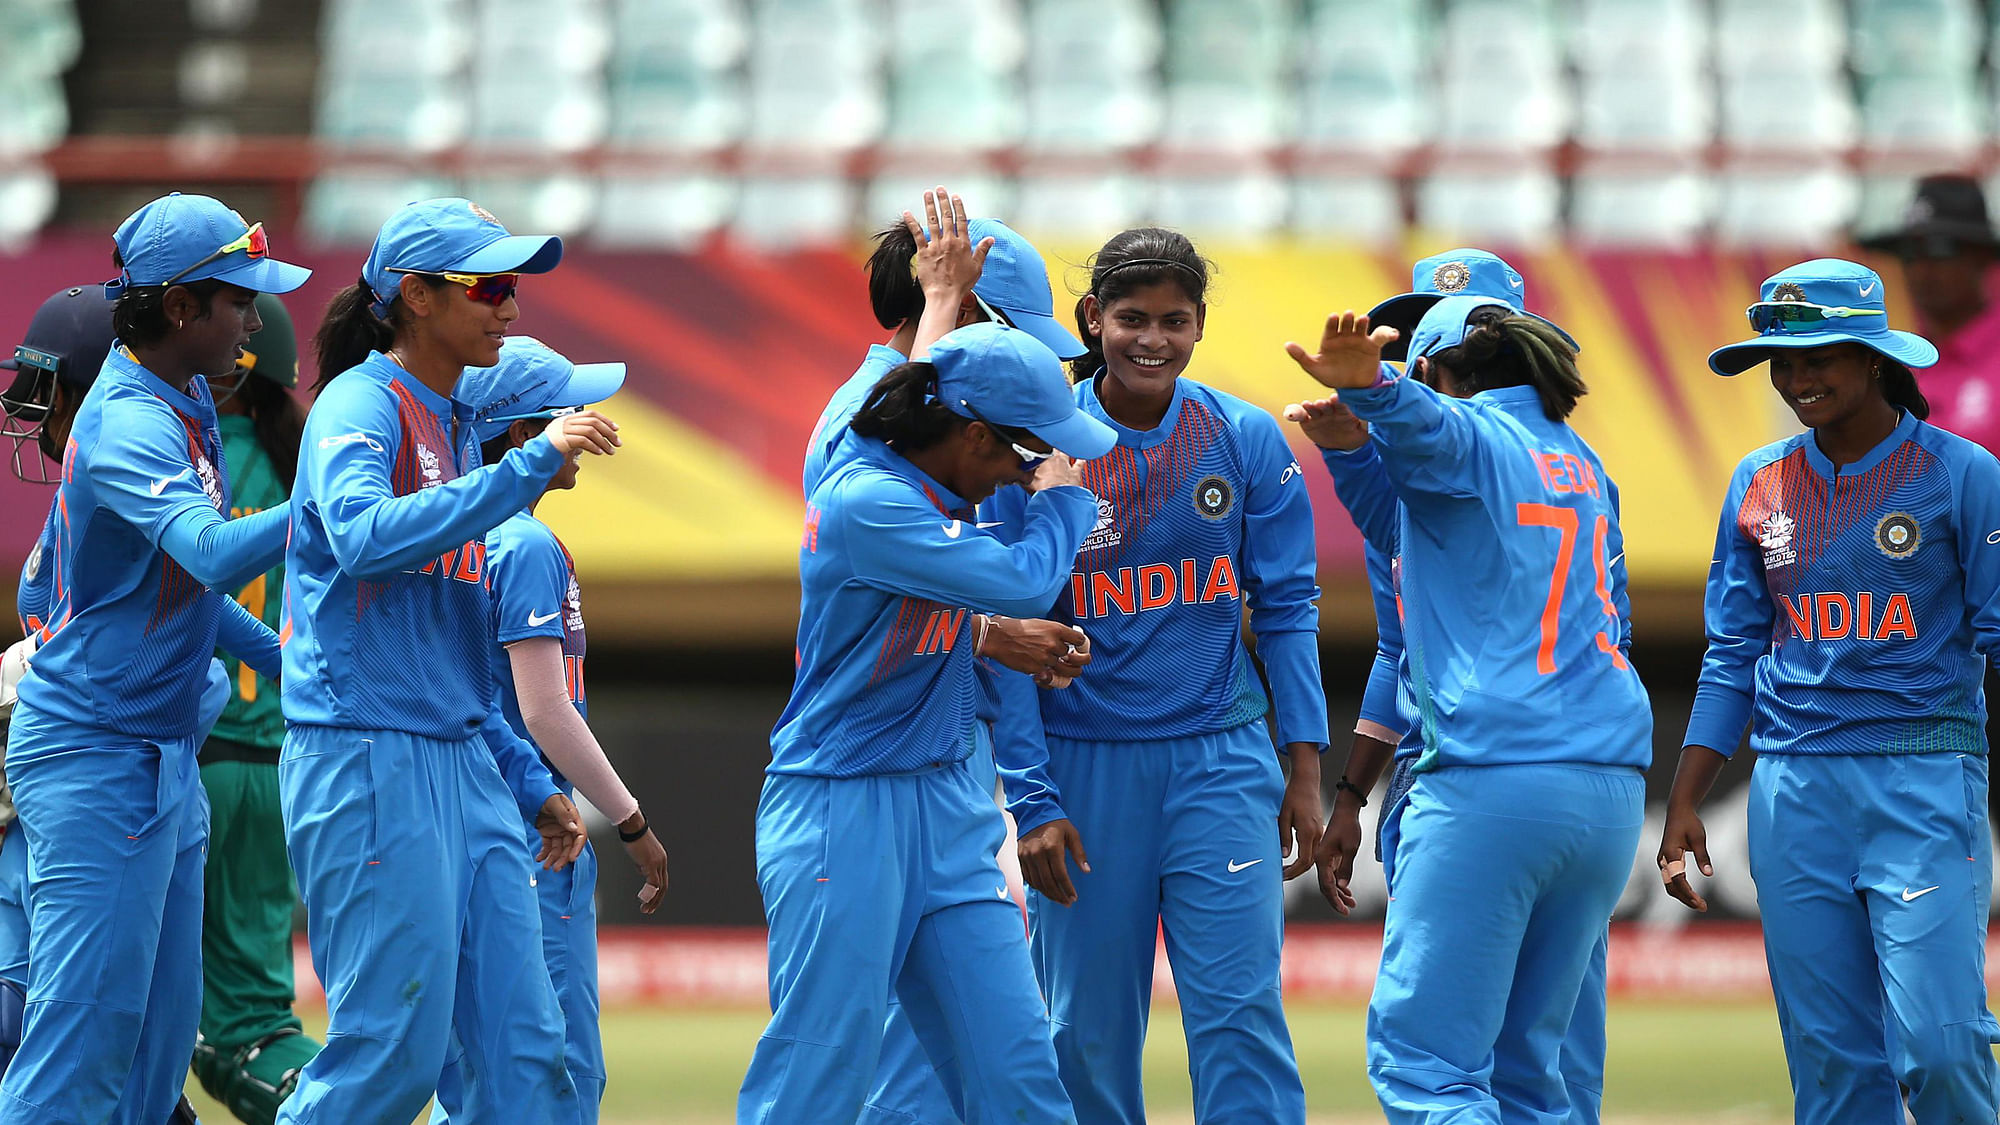 India are playing Ireland in their third match of the Women’s World T20 on Thursday.